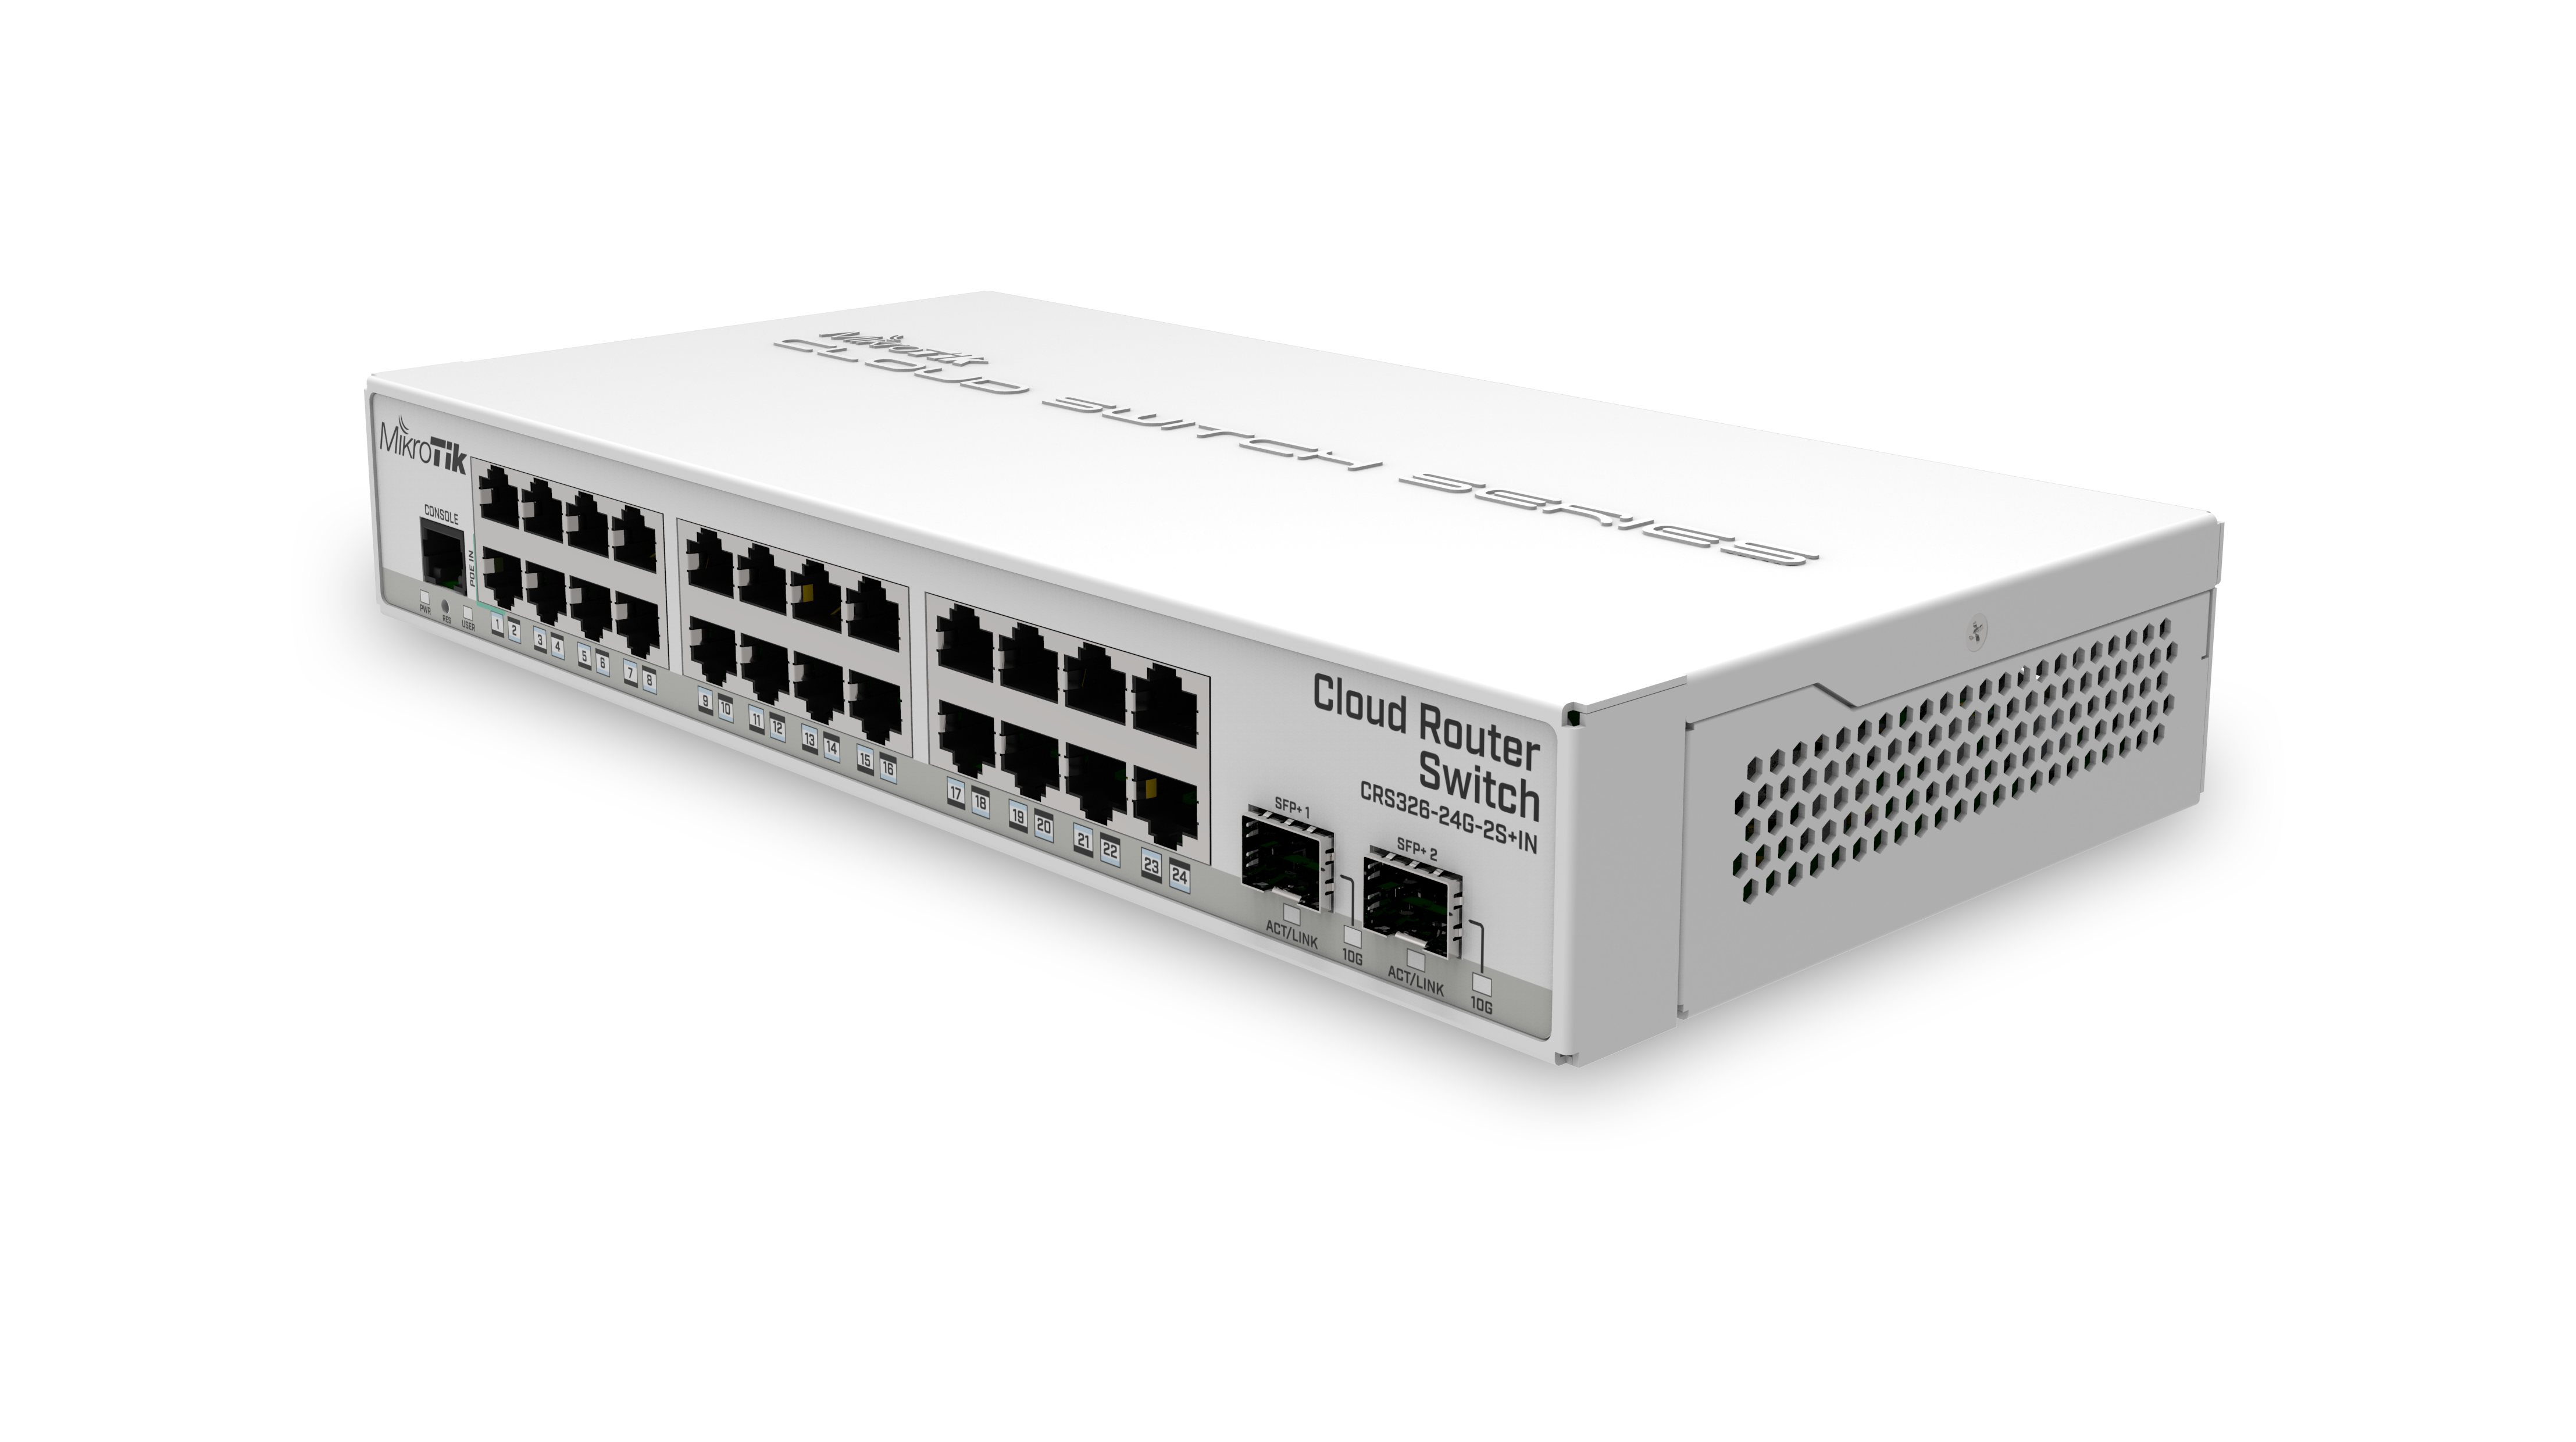 Mikrotik Routers And Wireless Products Crs326 24g 2s In